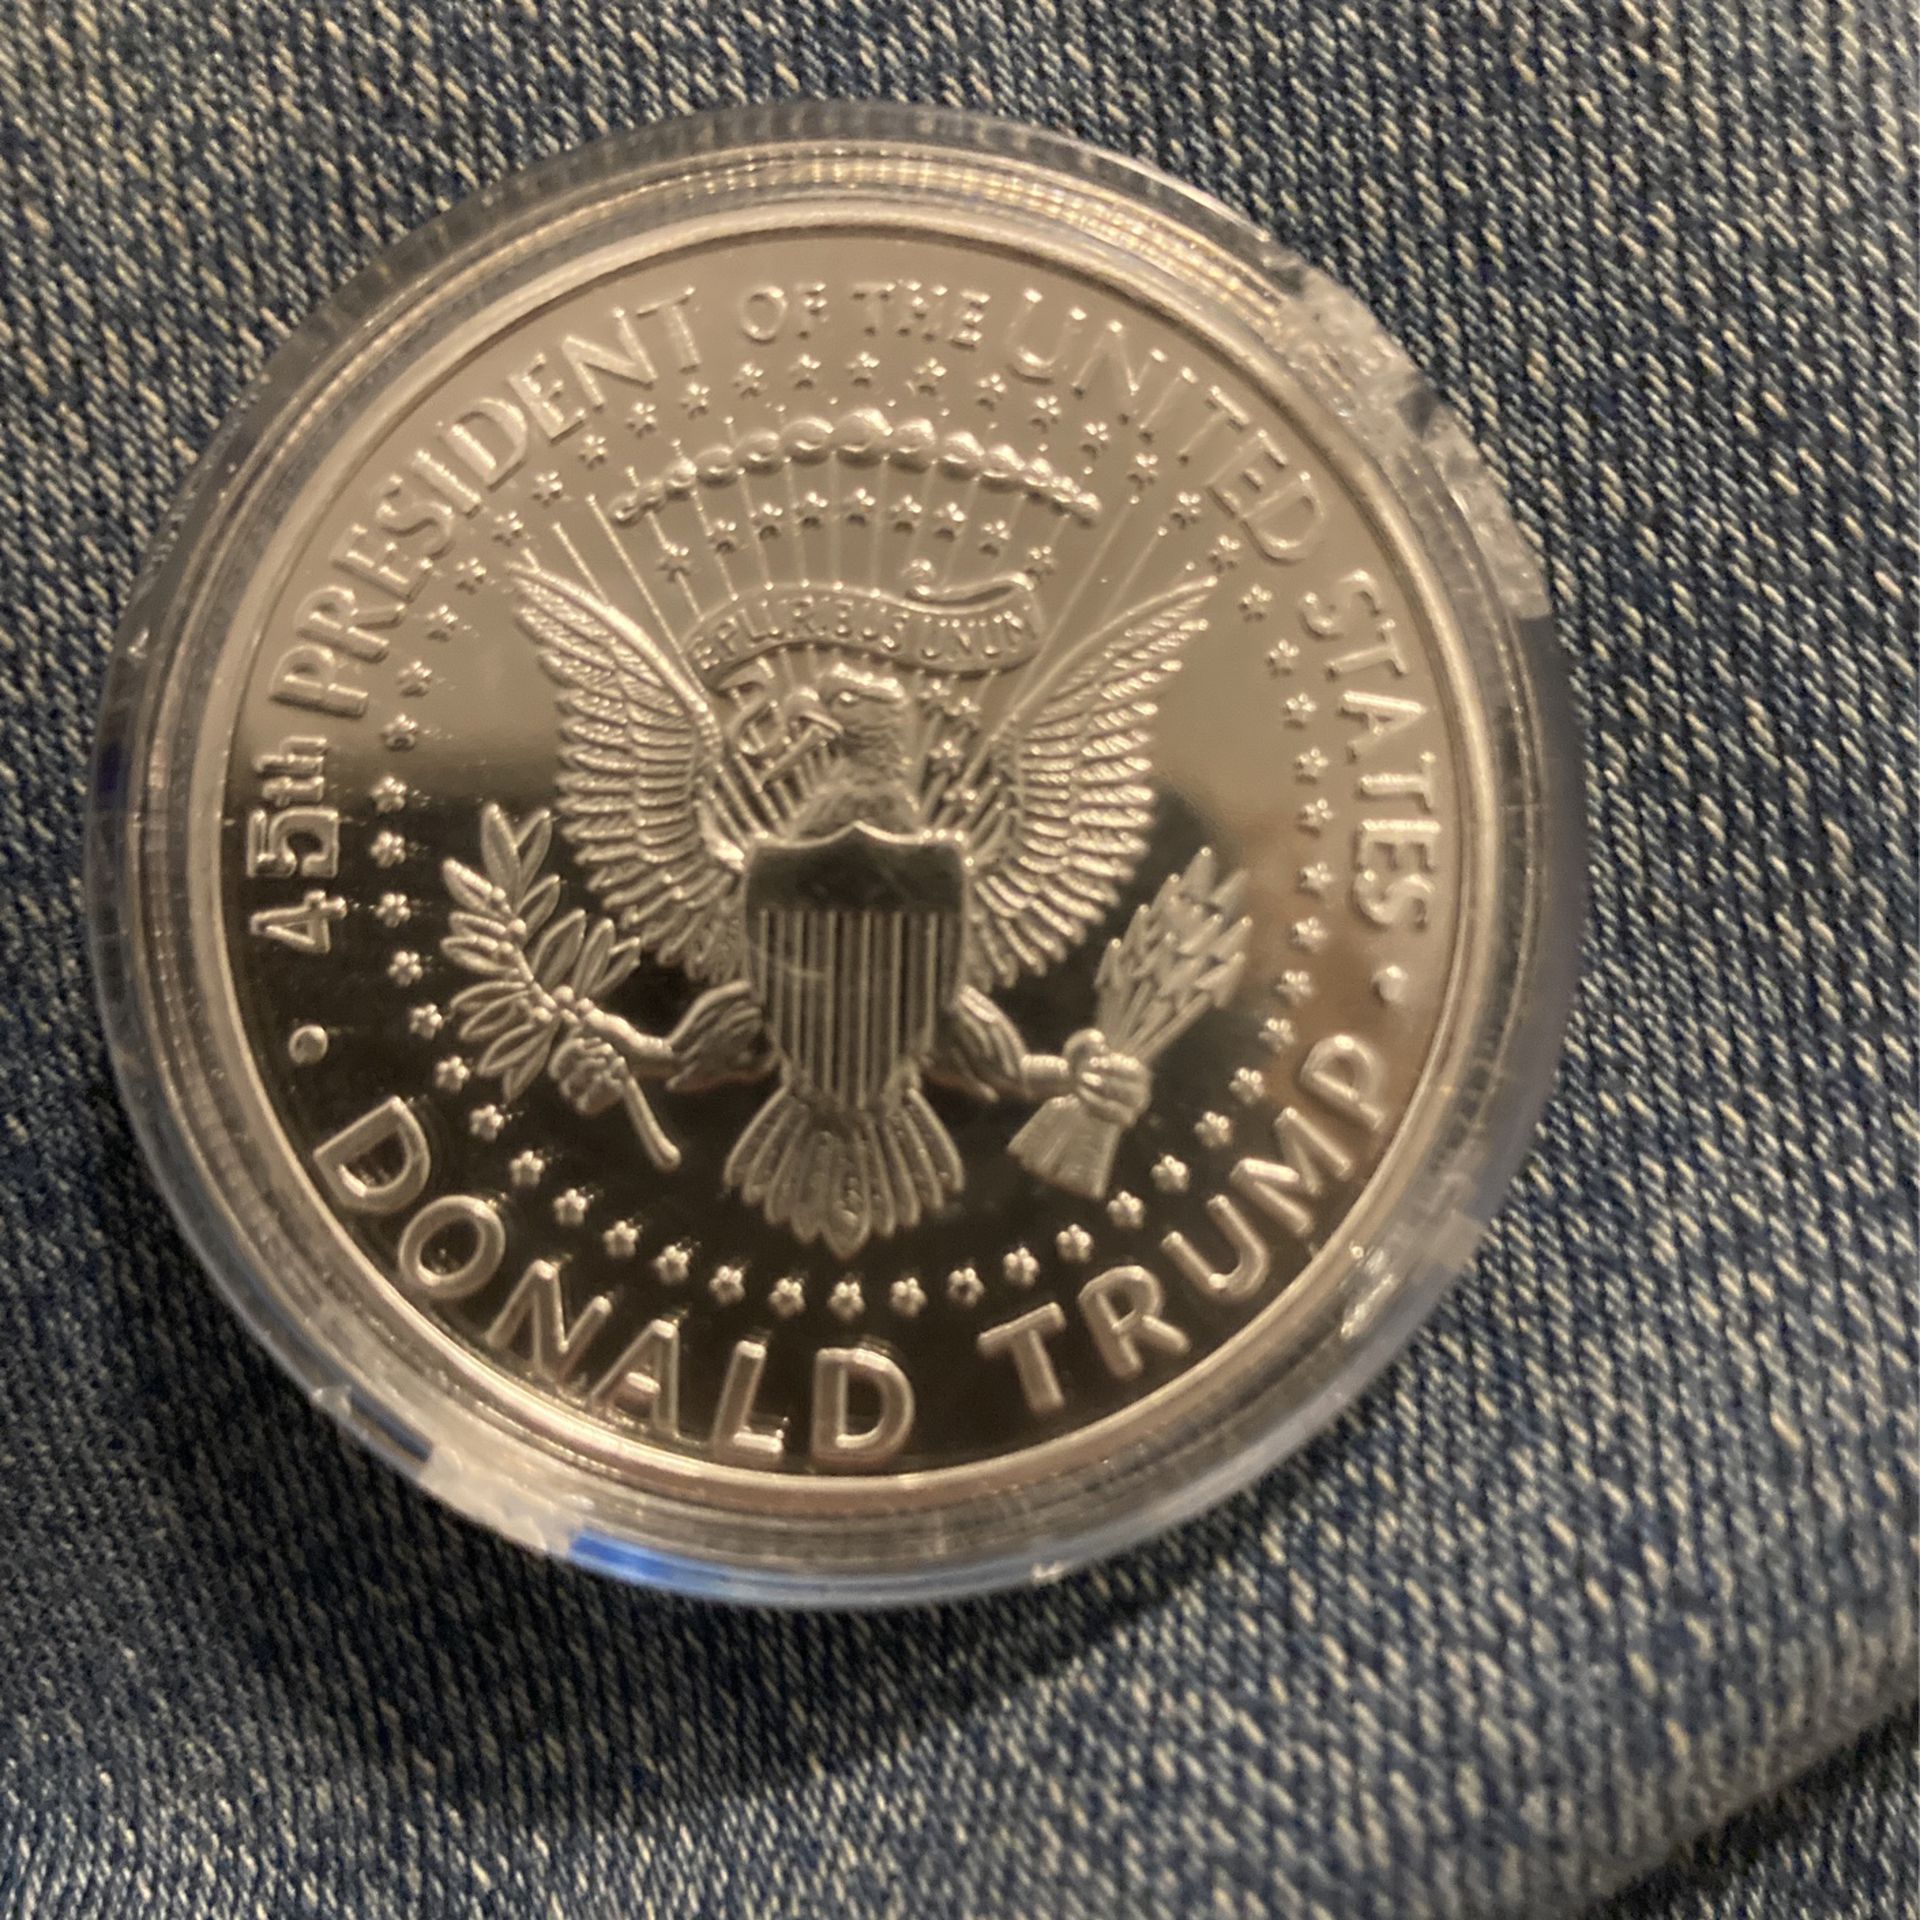 Sterling Silver Officiall Mint 45 Silver Dollar Signed By Mike Pence In Indiana